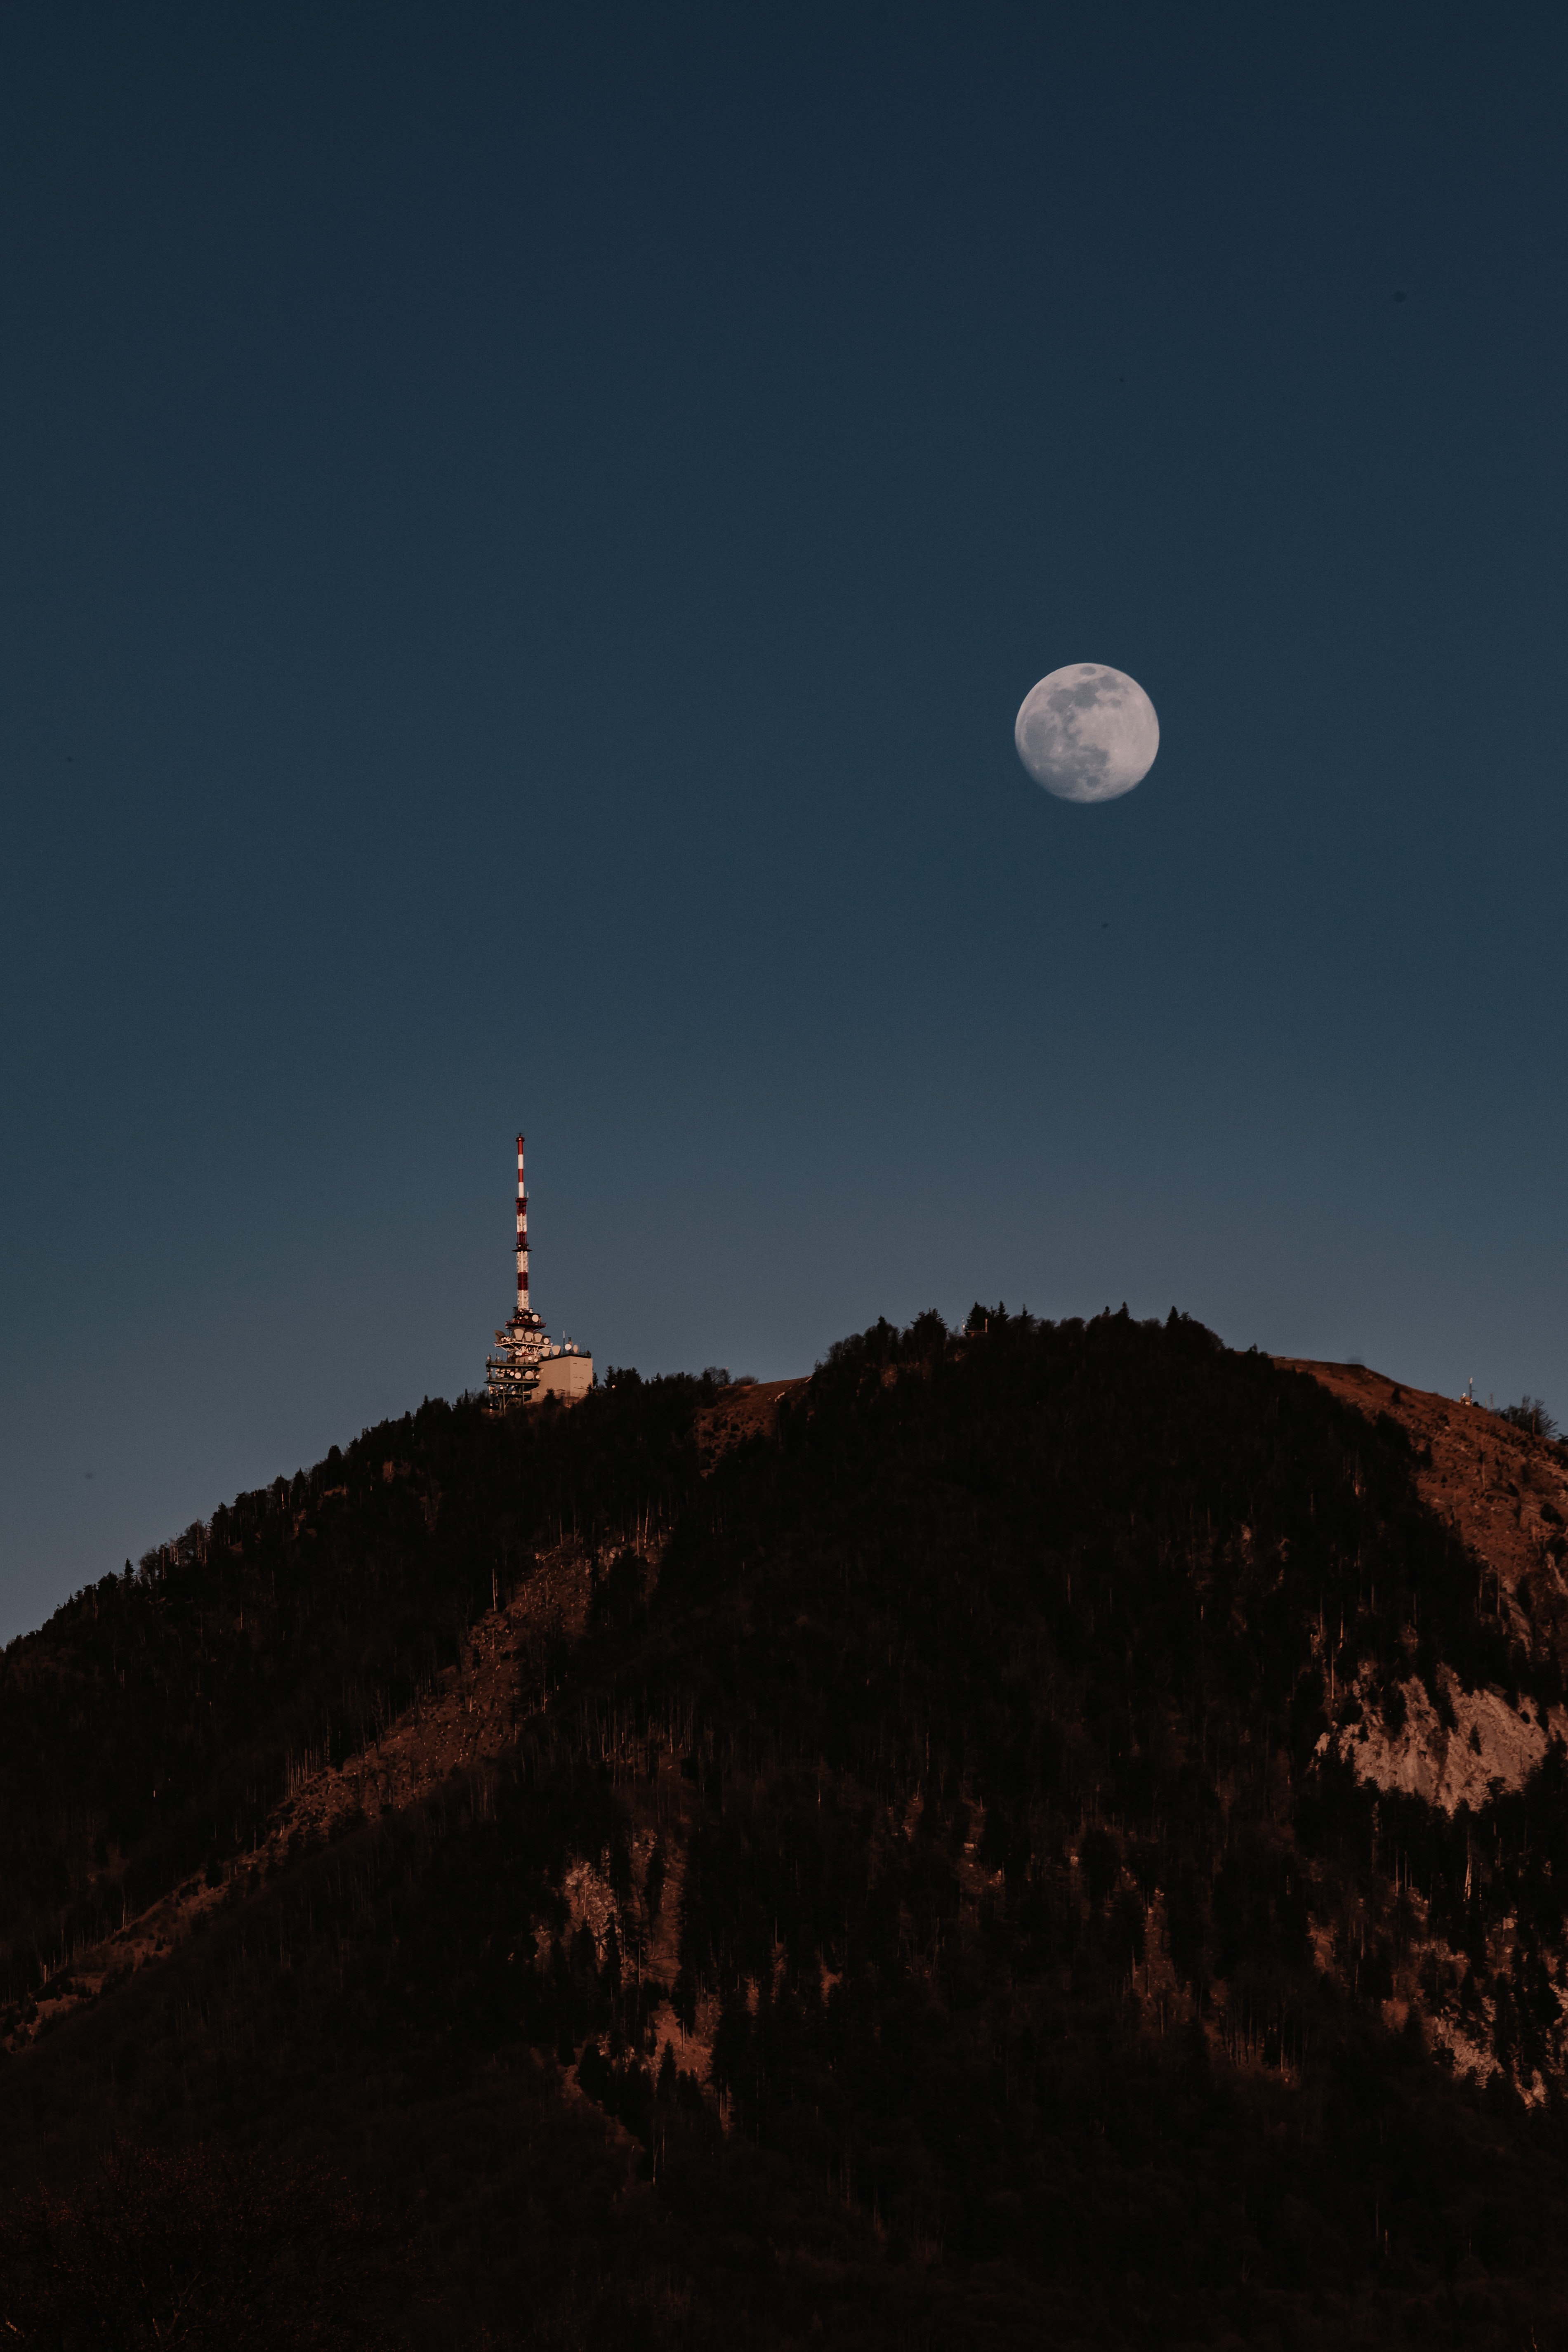 hill, nature, trees, moon, tower cellphone